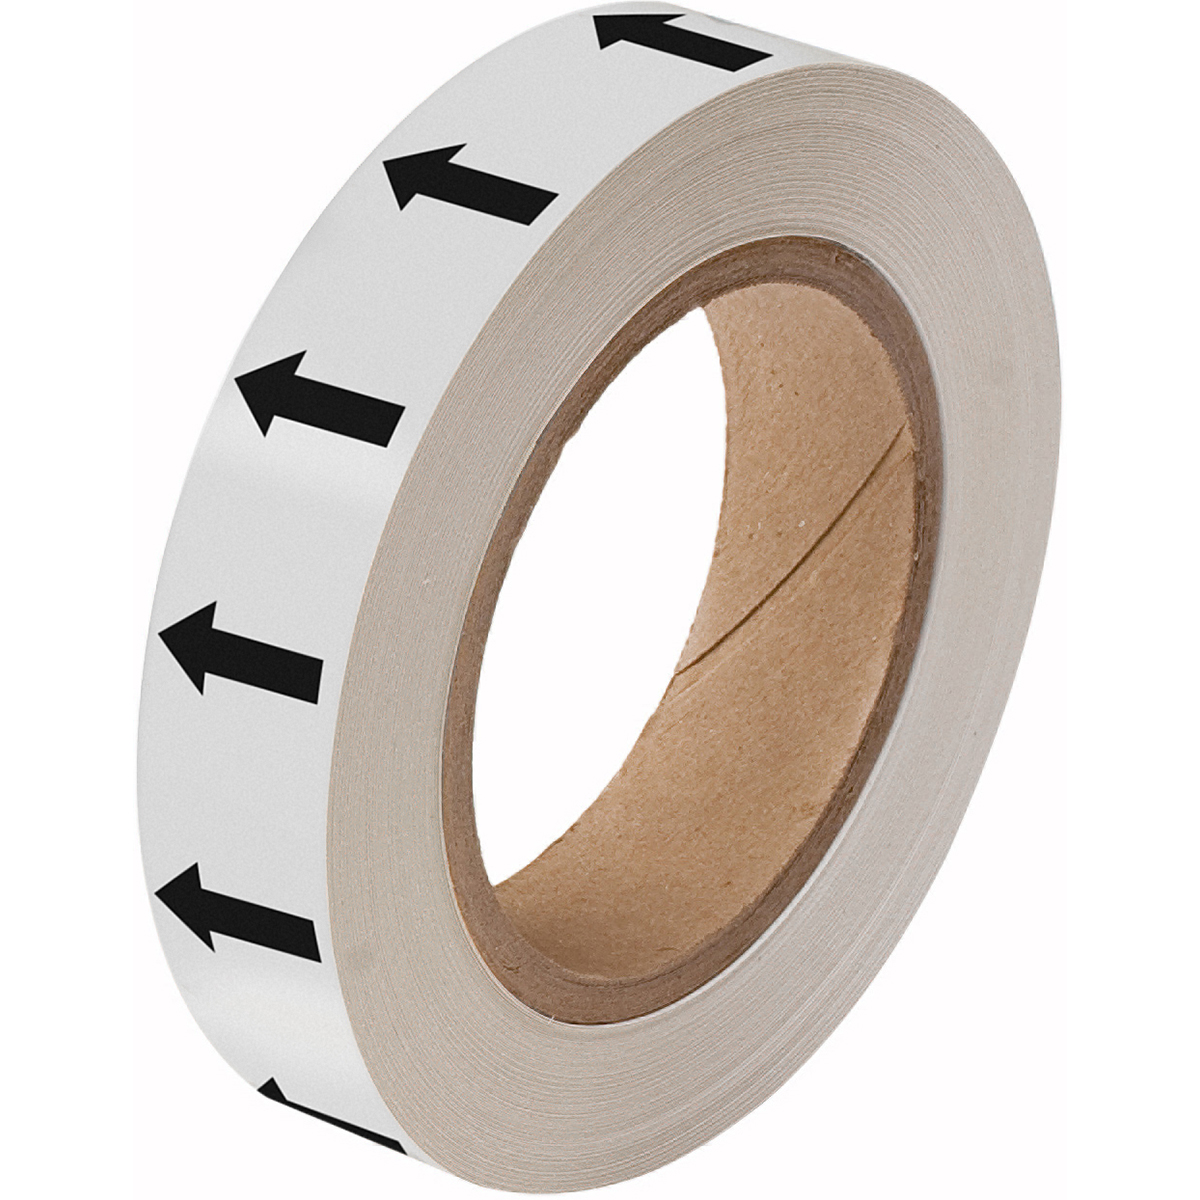 Black on White 25 mm Directional Flow Arrow Tape